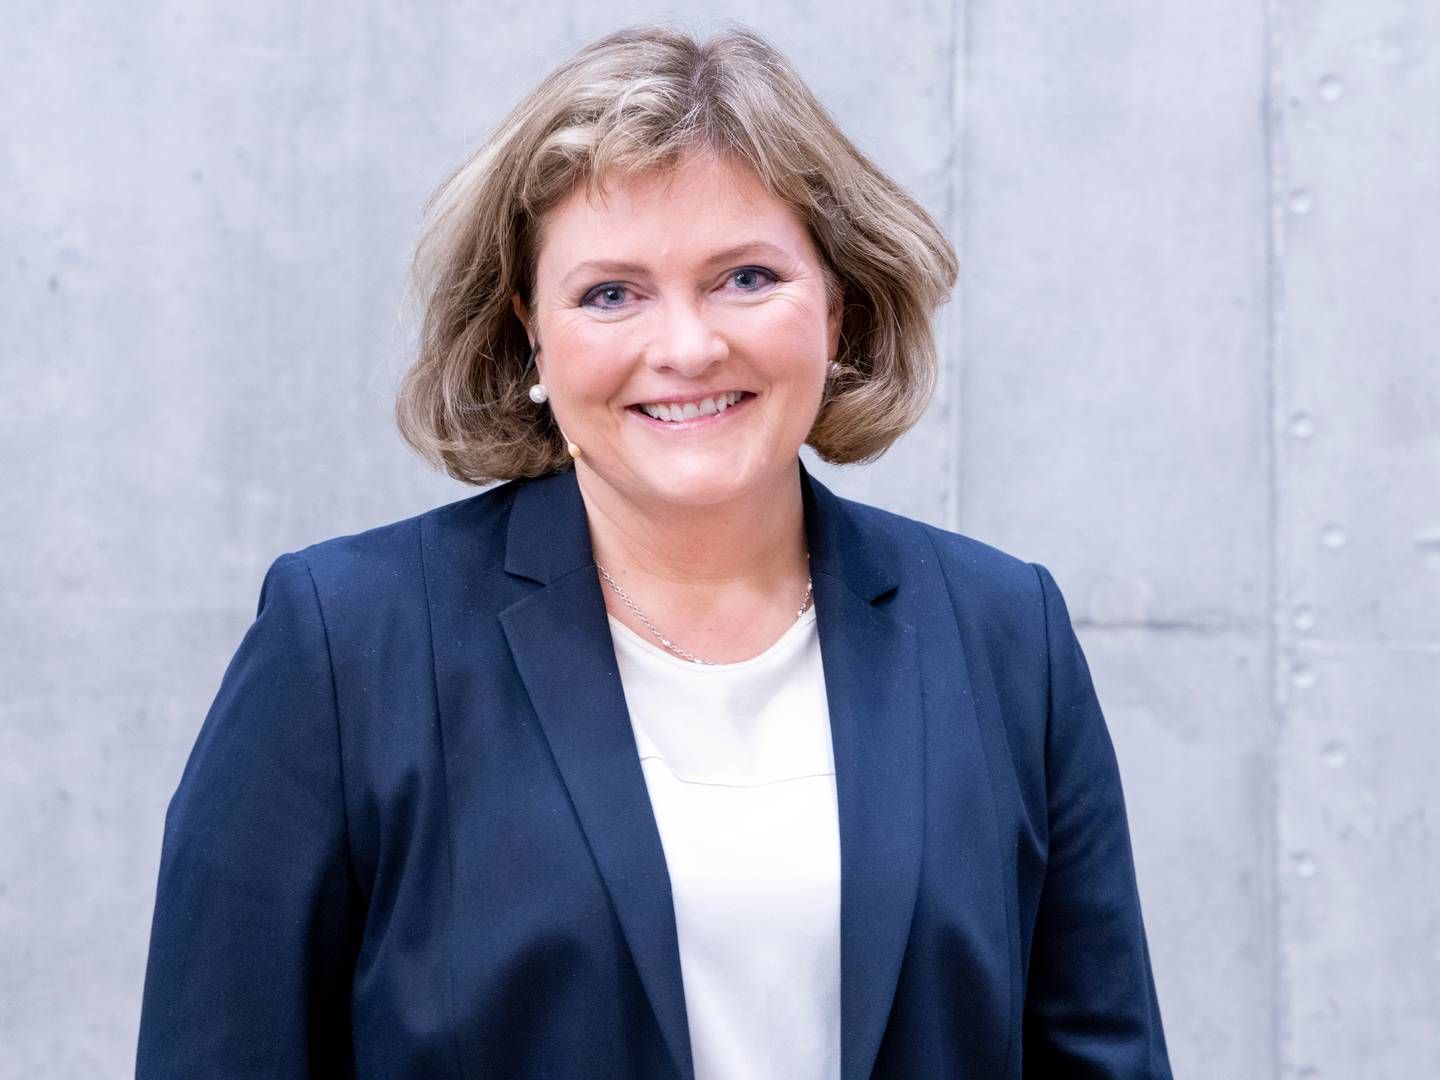 Cathrine Hellandsvik, executive vice presdent for life and pensions at KLP, is asking Ulstein municipality to provide "reasoned answers" to the objections KLP has raised after the company lost the tender round.